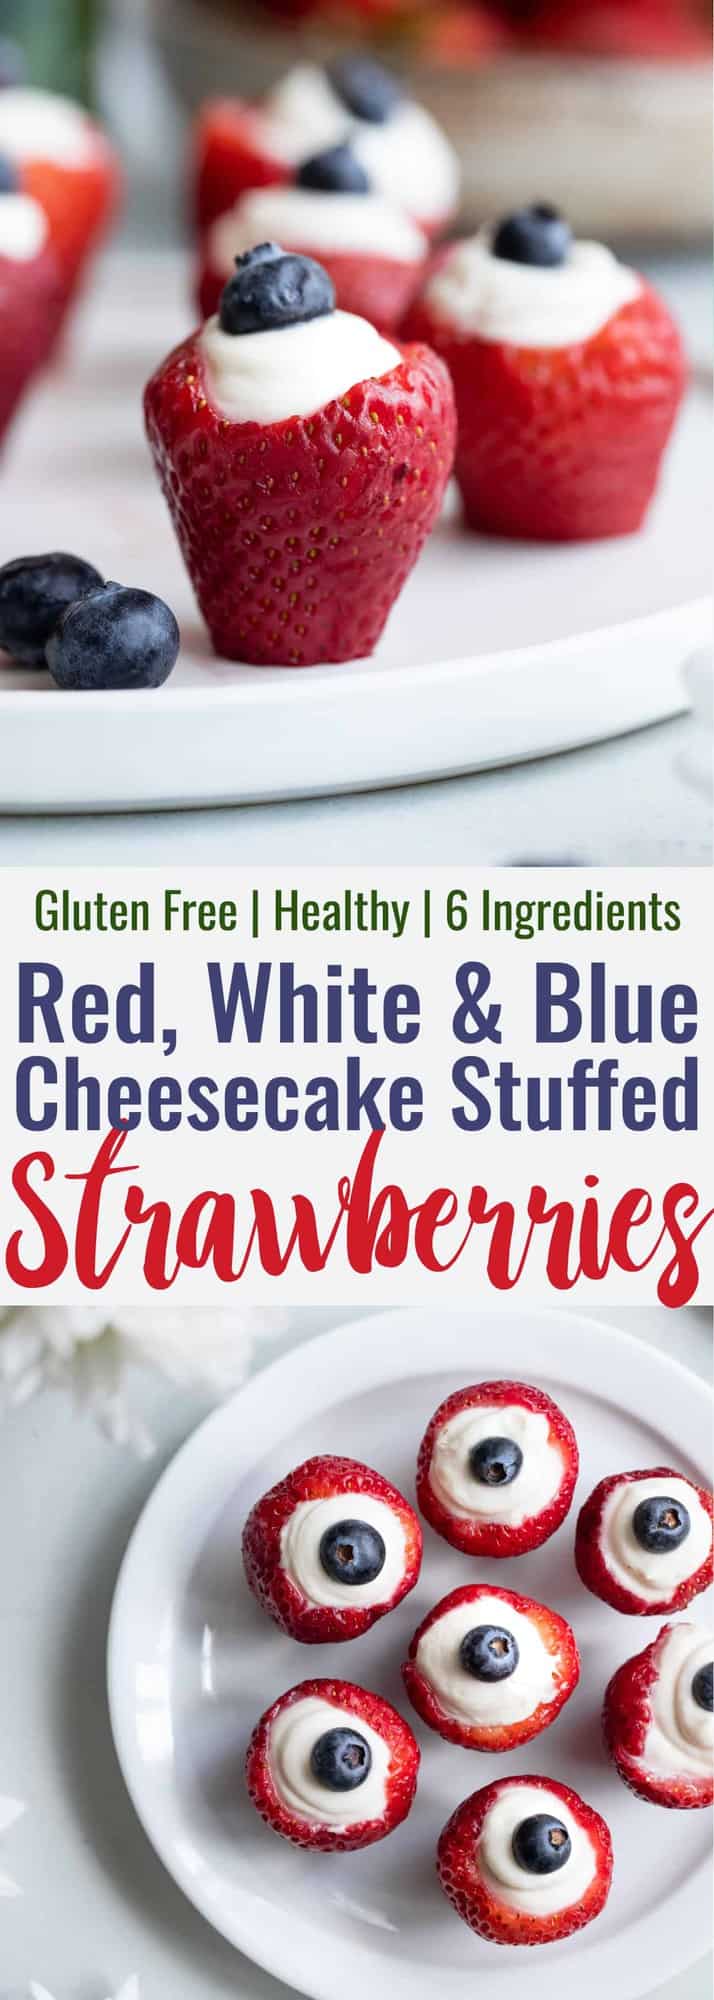 Red White & Blue Cheesecake Stuffed Strawberries - A gluten free, low carb, keto and sugar free dessert that are SO easy to make! Only 30 calories and so tasty! Perfect for the Summer or July 4th! | #Foodfaithfitness | #Glutenfree #Lowcarb #Keto #Sugarfree #July4th